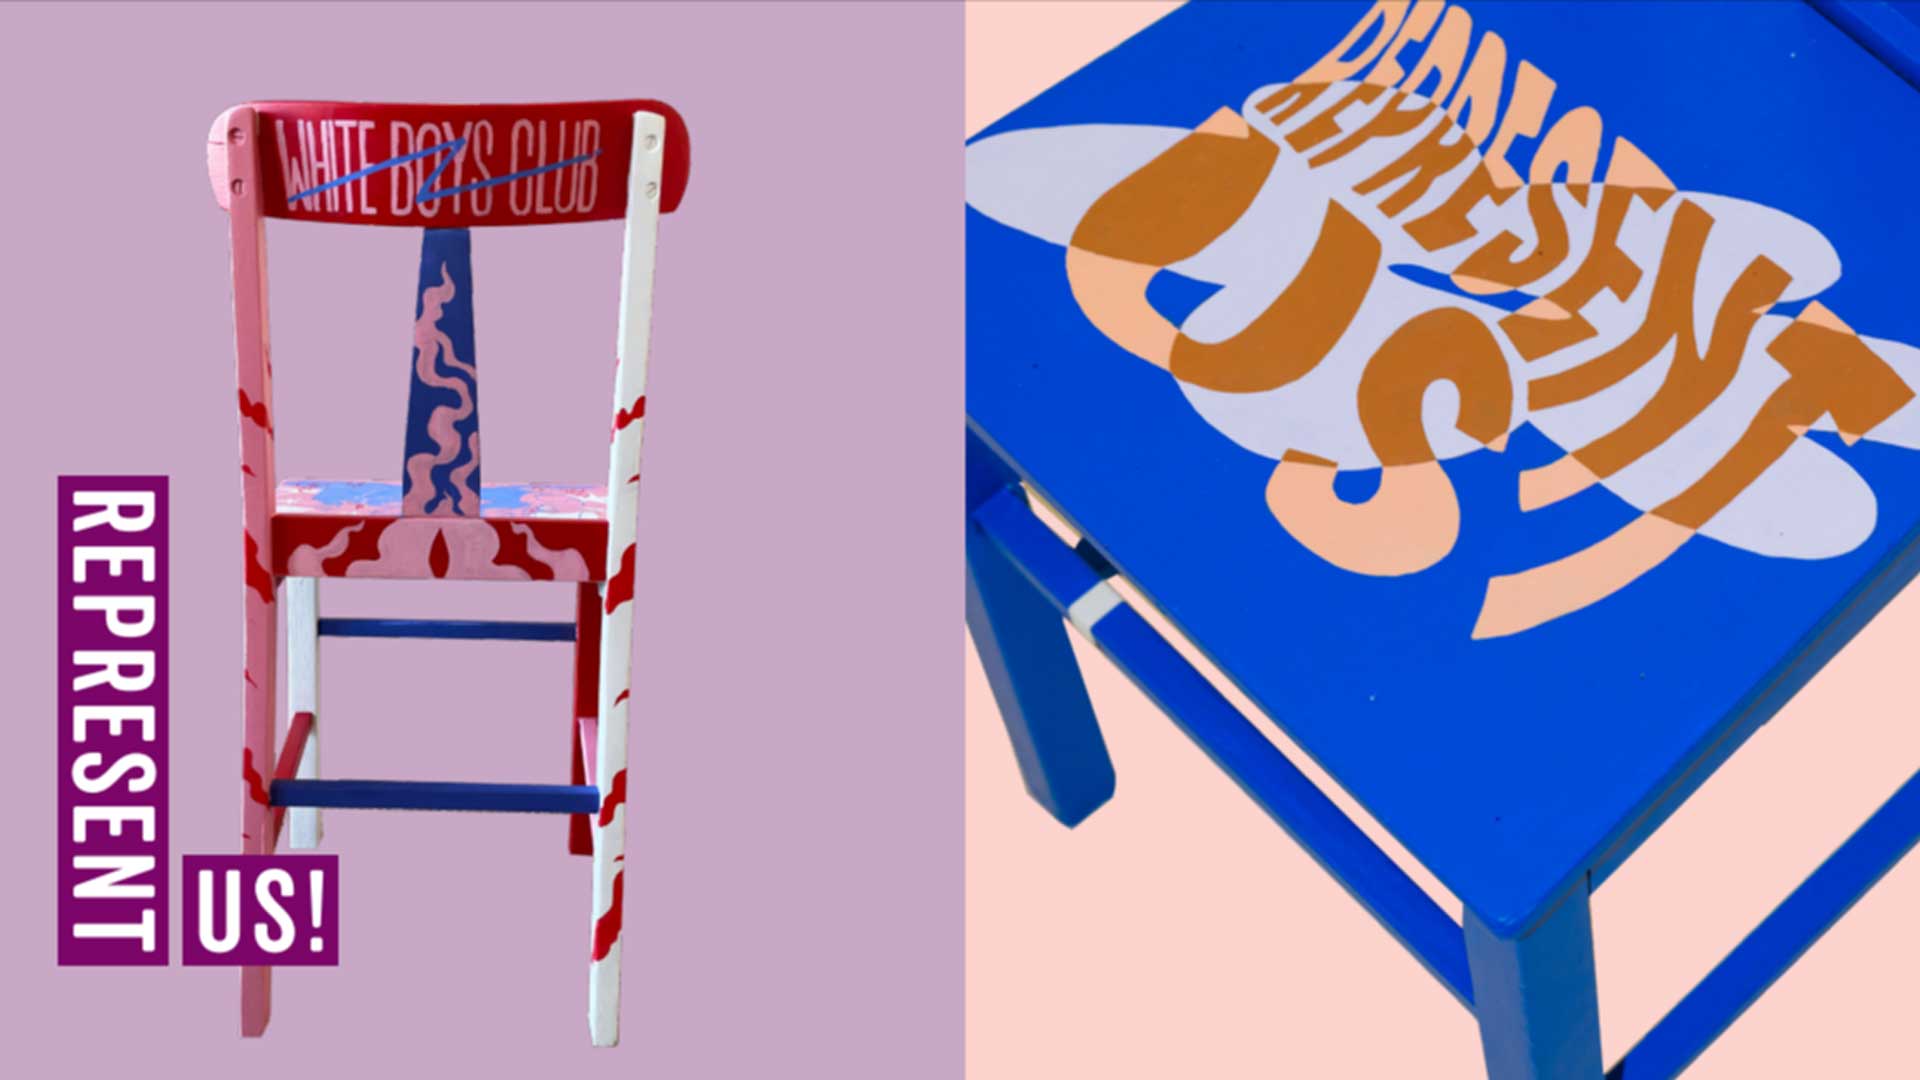 Colourful illustrations of chairs with the words "Represent Us"